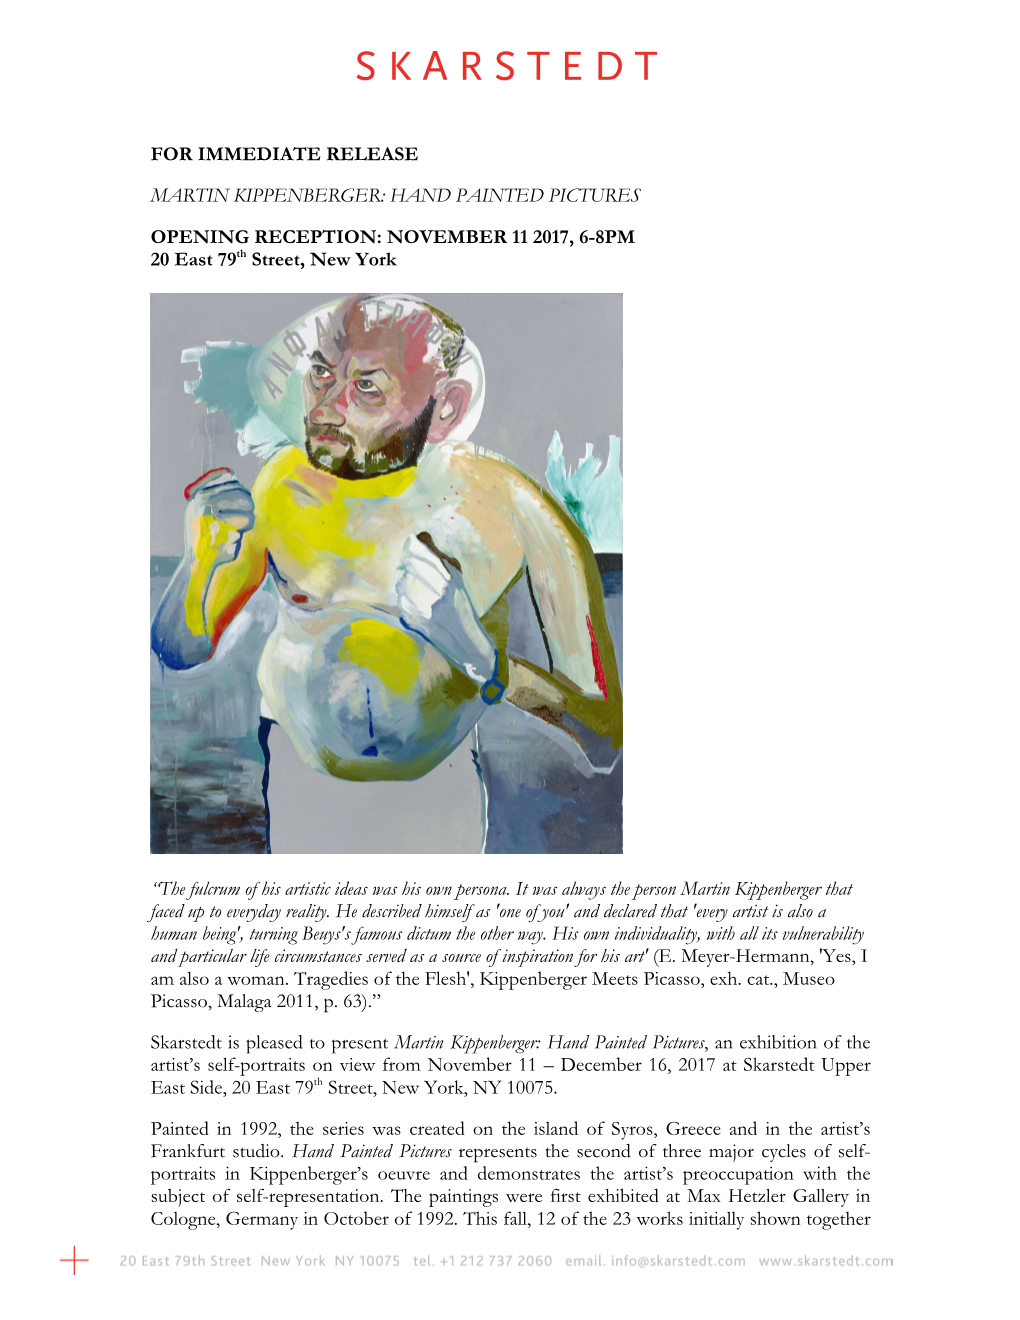 FOR IMMEDIATE RELEASE MARTIN KIPPENBERGER: HAND PAINTED PICTURES OPENING RECEPTION: NOVEMBER 11 2017, 6-8PM 20 East 79Th Street